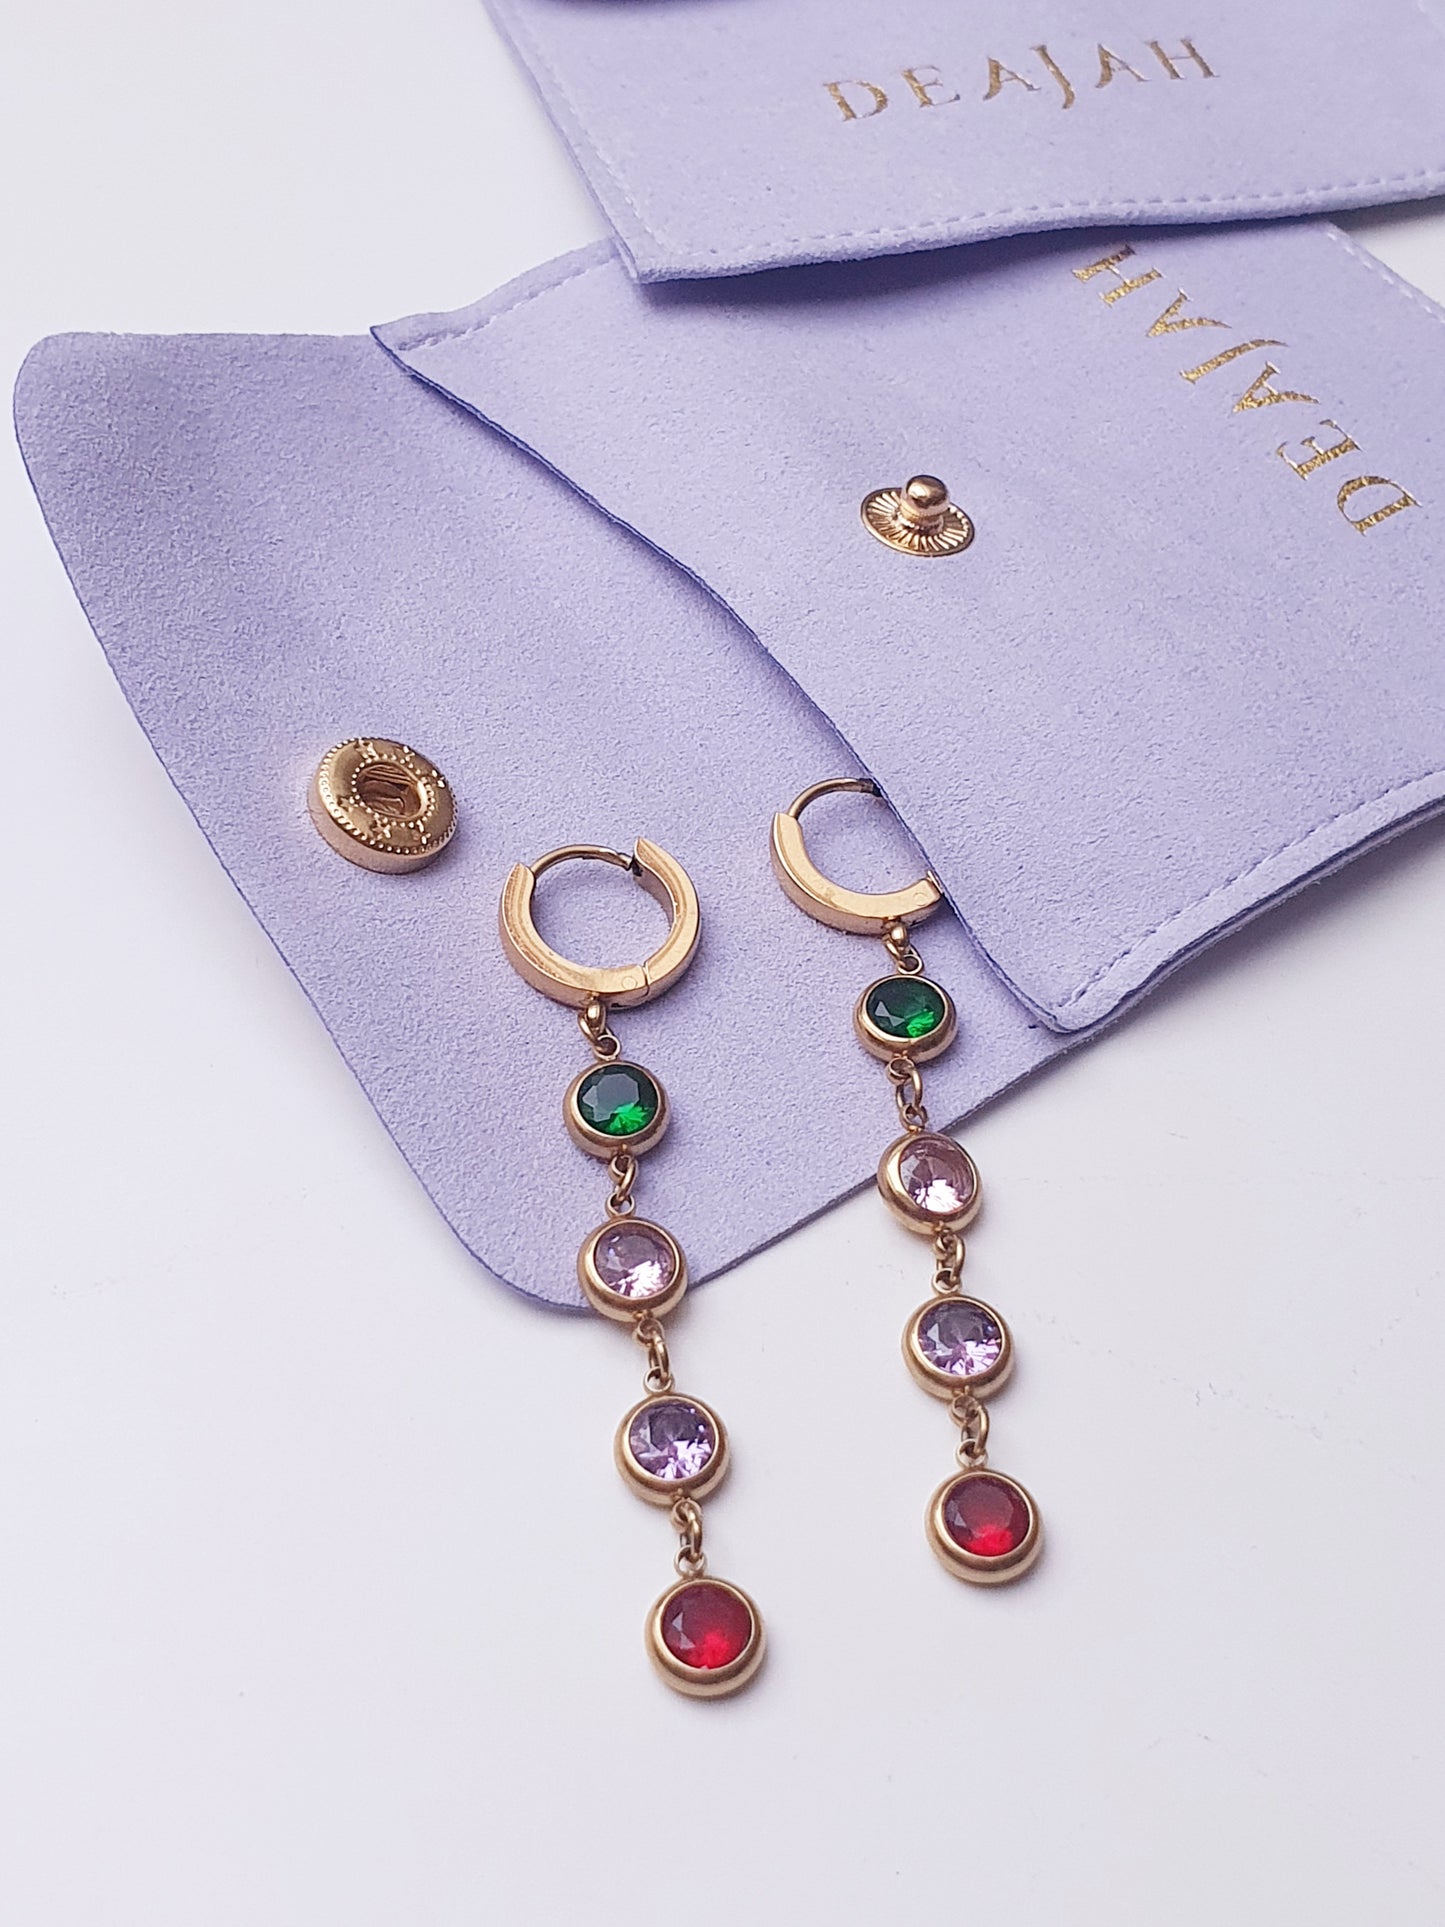 A pair of gold huggy hoops with dangling round gems set with green, pink, purple and red stones rest on a purple jewellery pouch